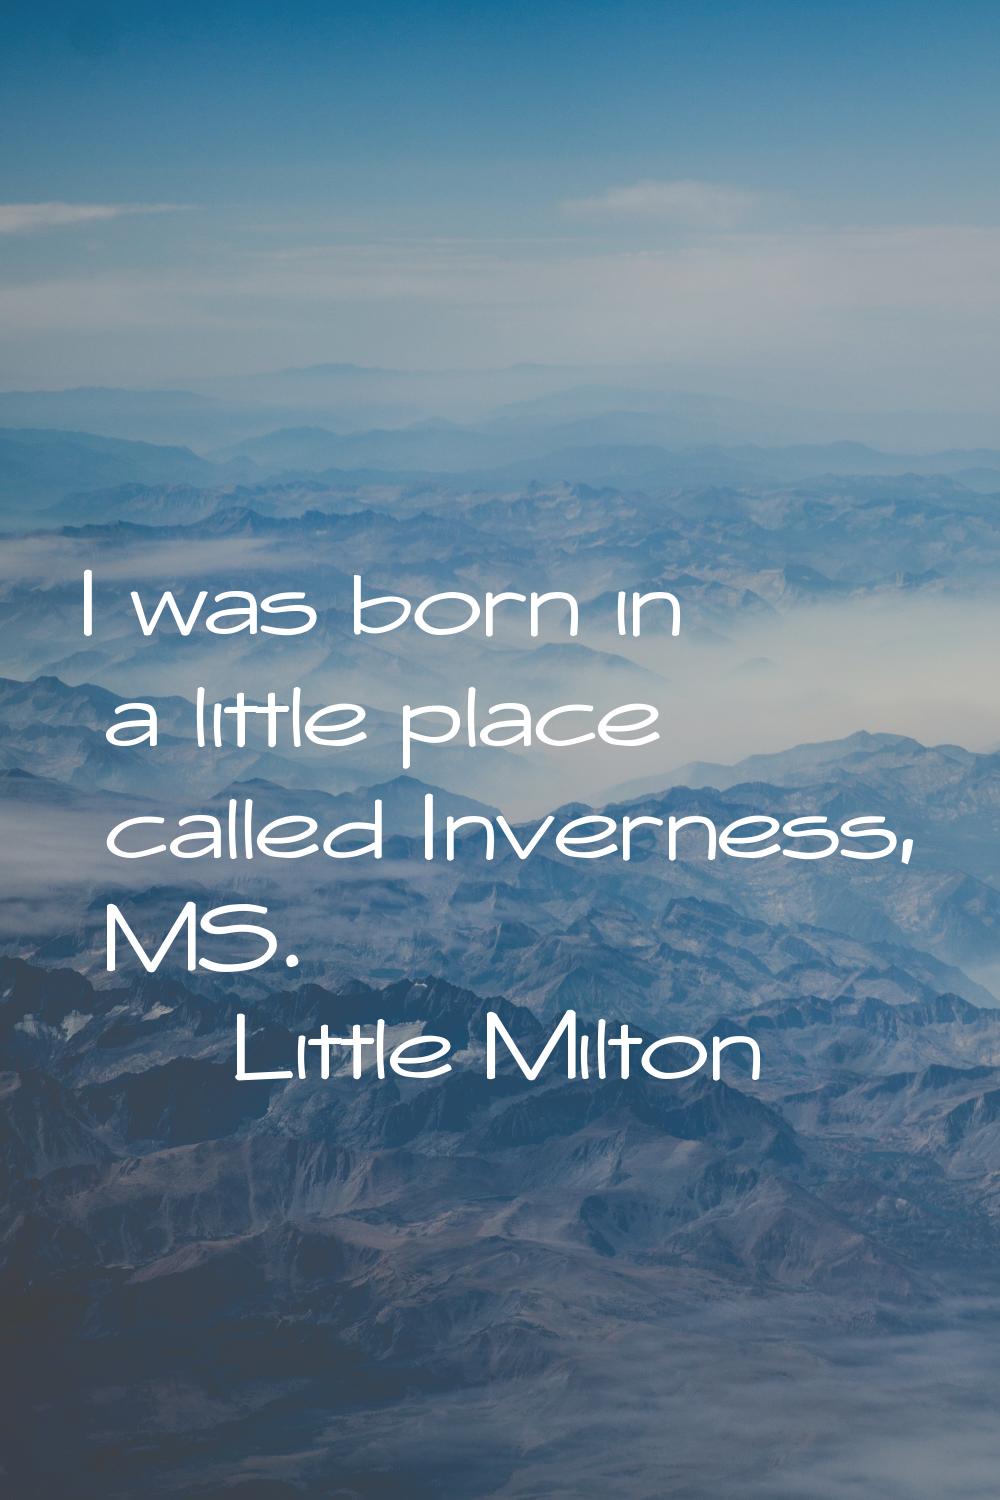 I was born in a little place called Inverness, MS.